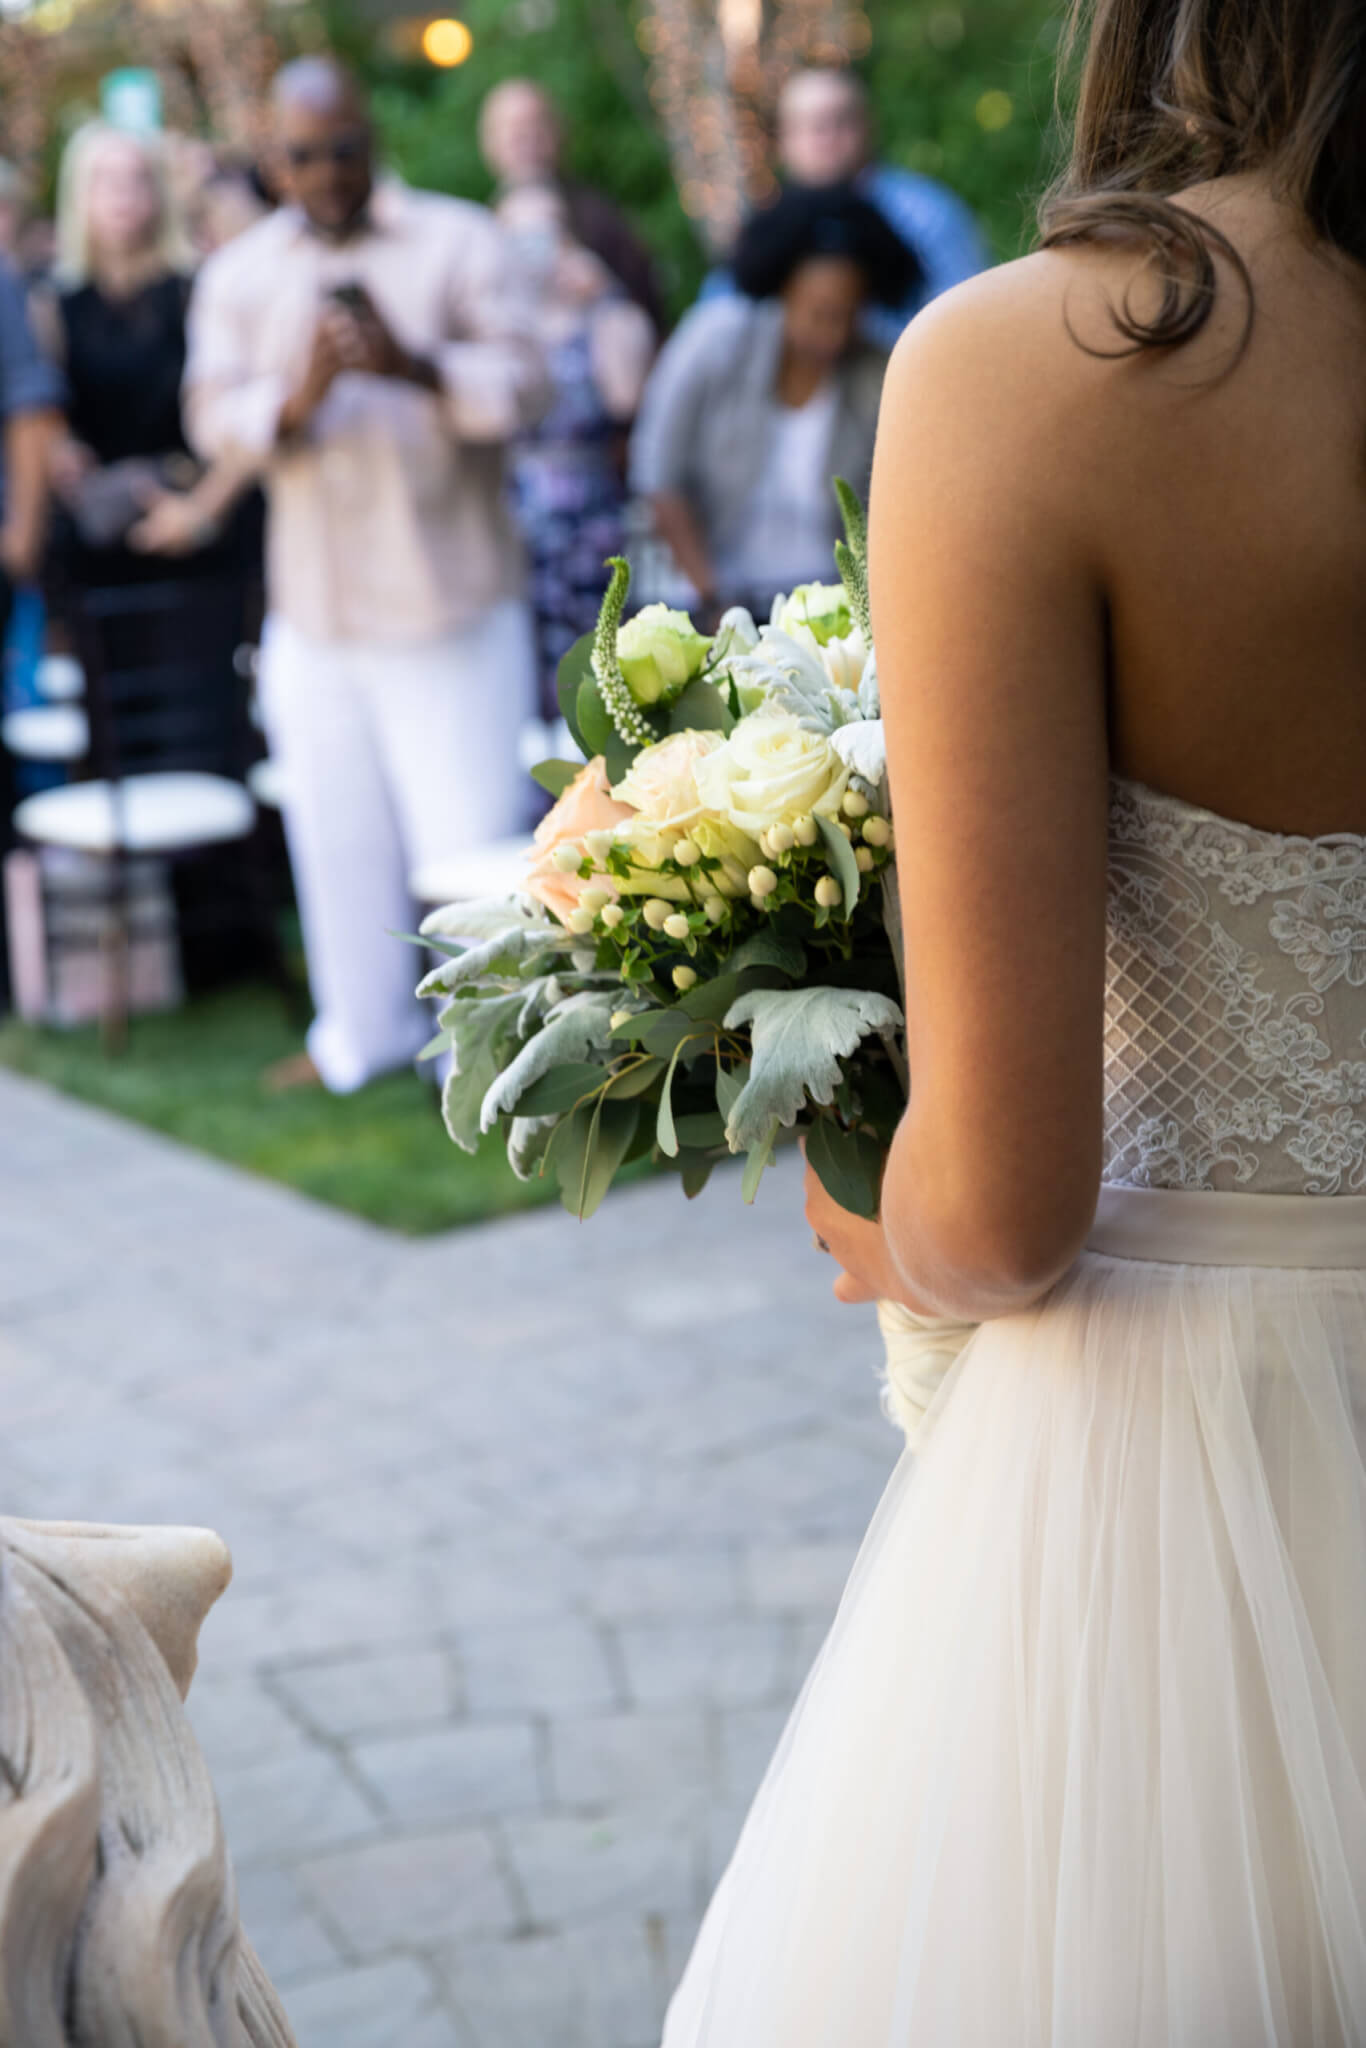 My Dad Didn’t Walk Me Down the Aisle – and I Survived